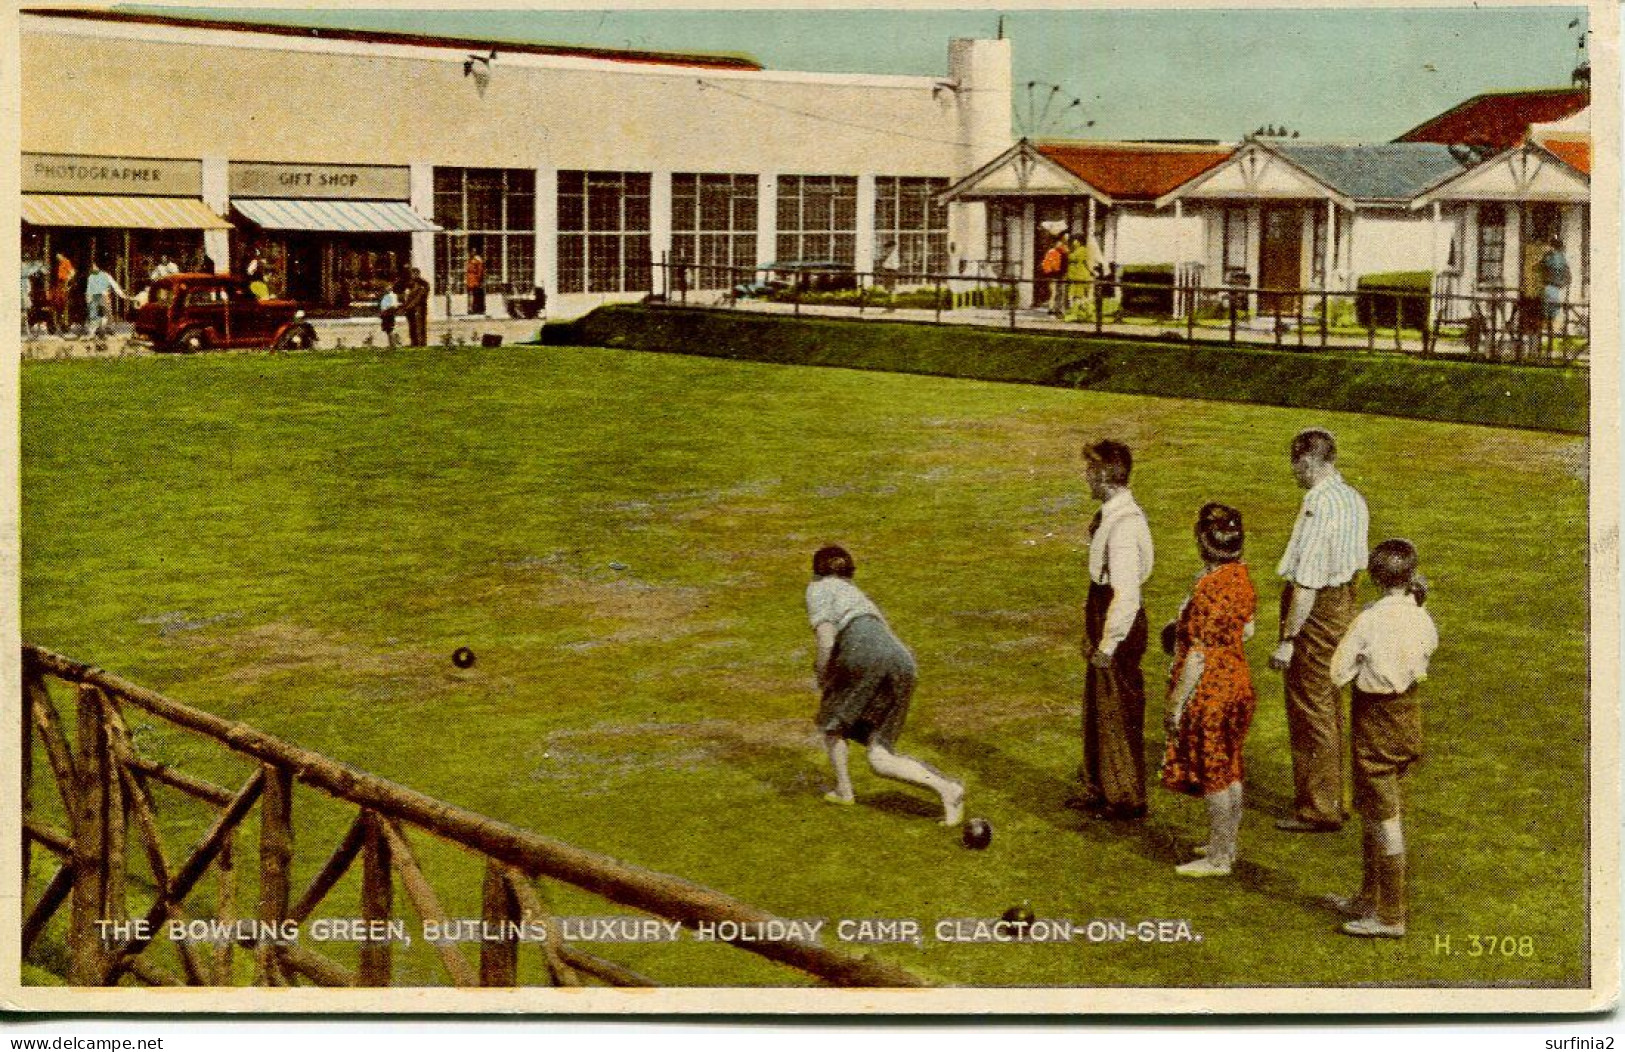 BUTLINS - CLACTON - THE BOWLING GREEN AT LUXURY HOLIDAY CAMP RP - Clacton On Sea